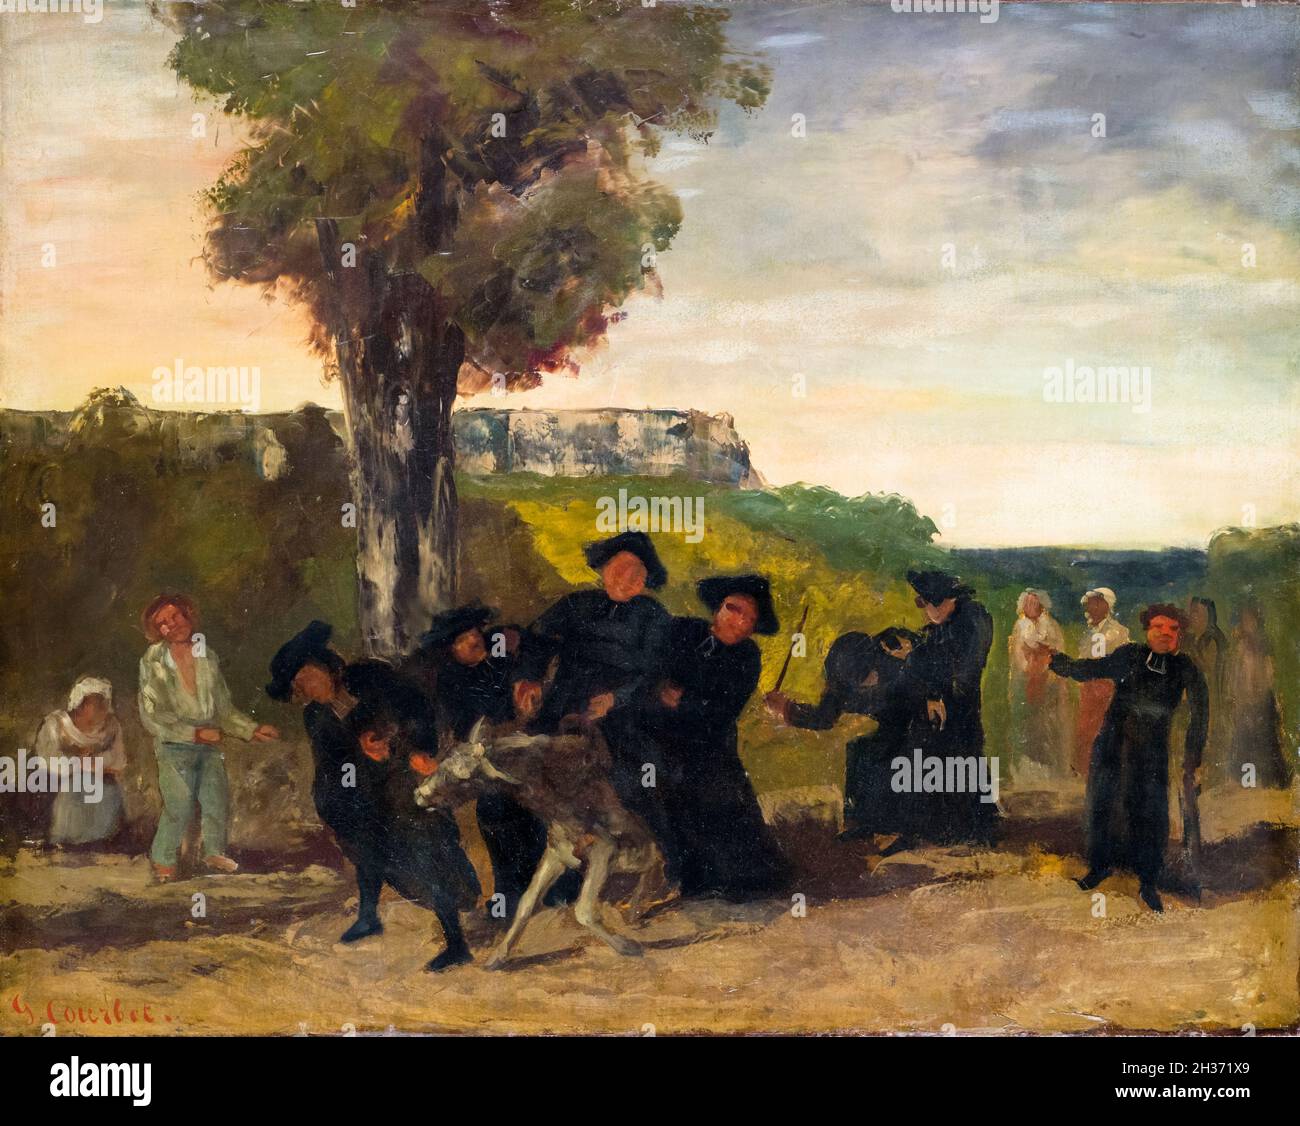 Gustave Courbet, The return from the meeting, painting, 1863 Stock Photo